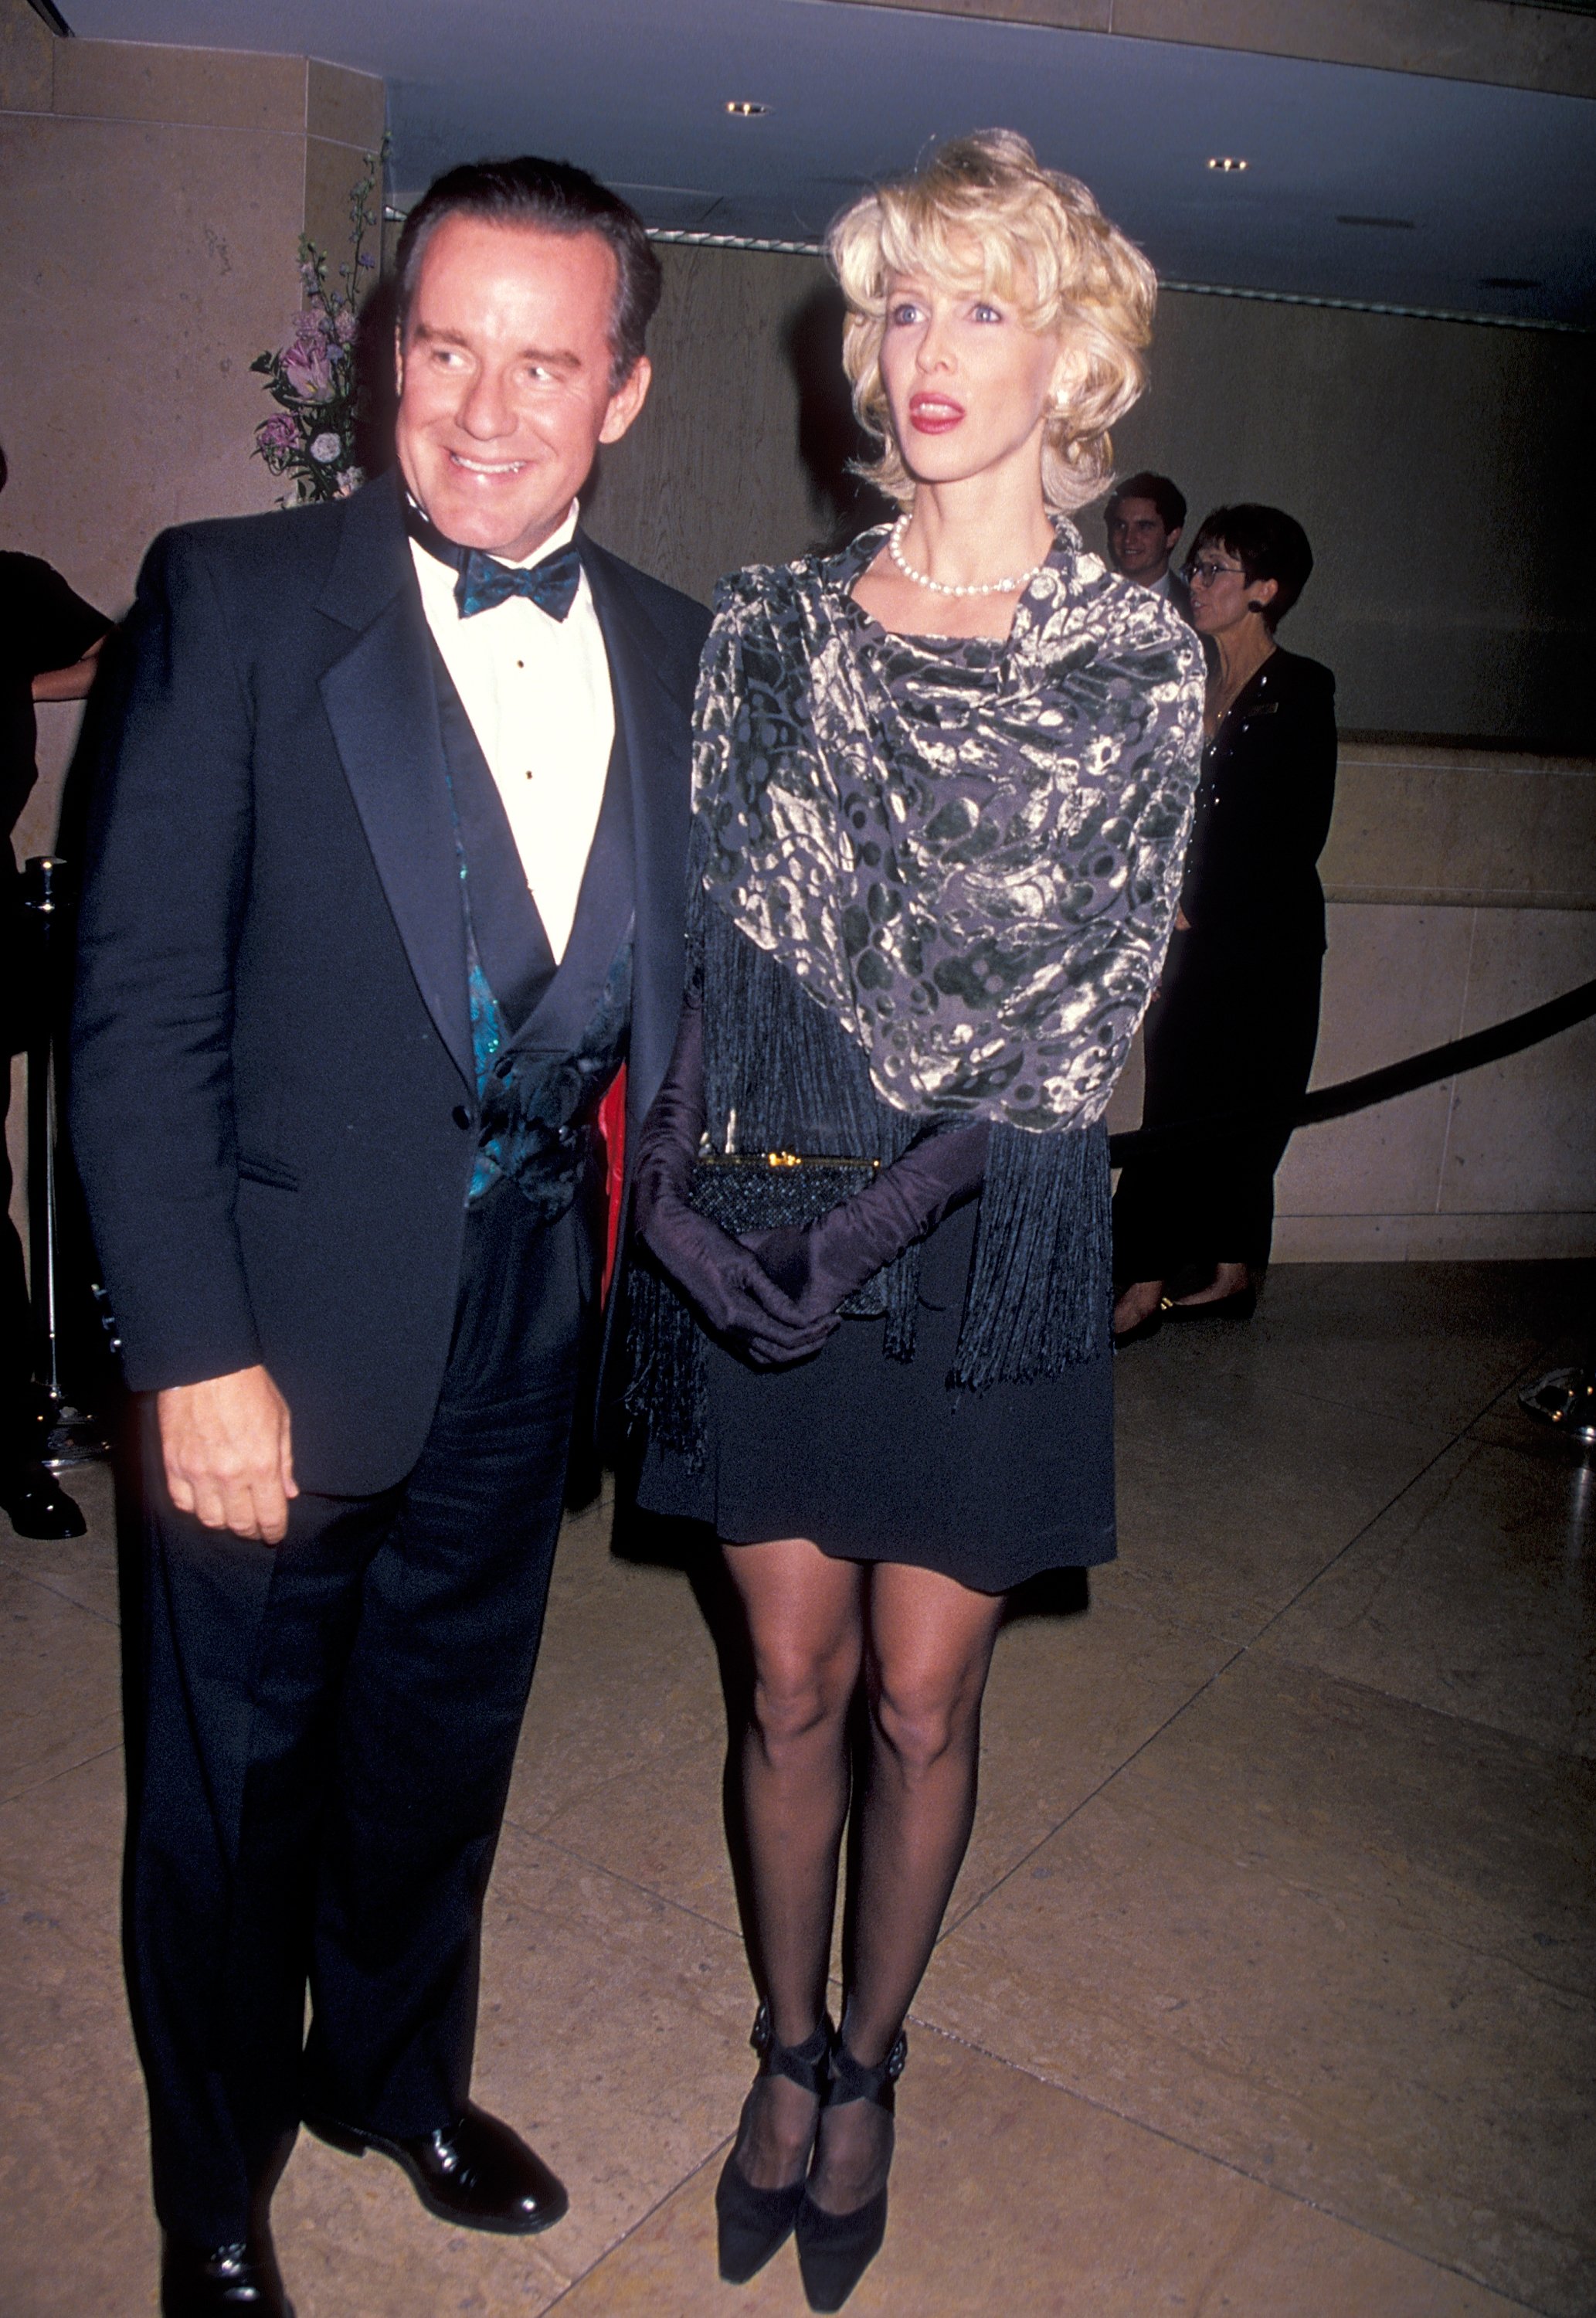 Phil Hartman and wife Brynn at the Beverly Hilton Hotel in Beverly Hills, California on October 28, 1994 | Source: Getty Images